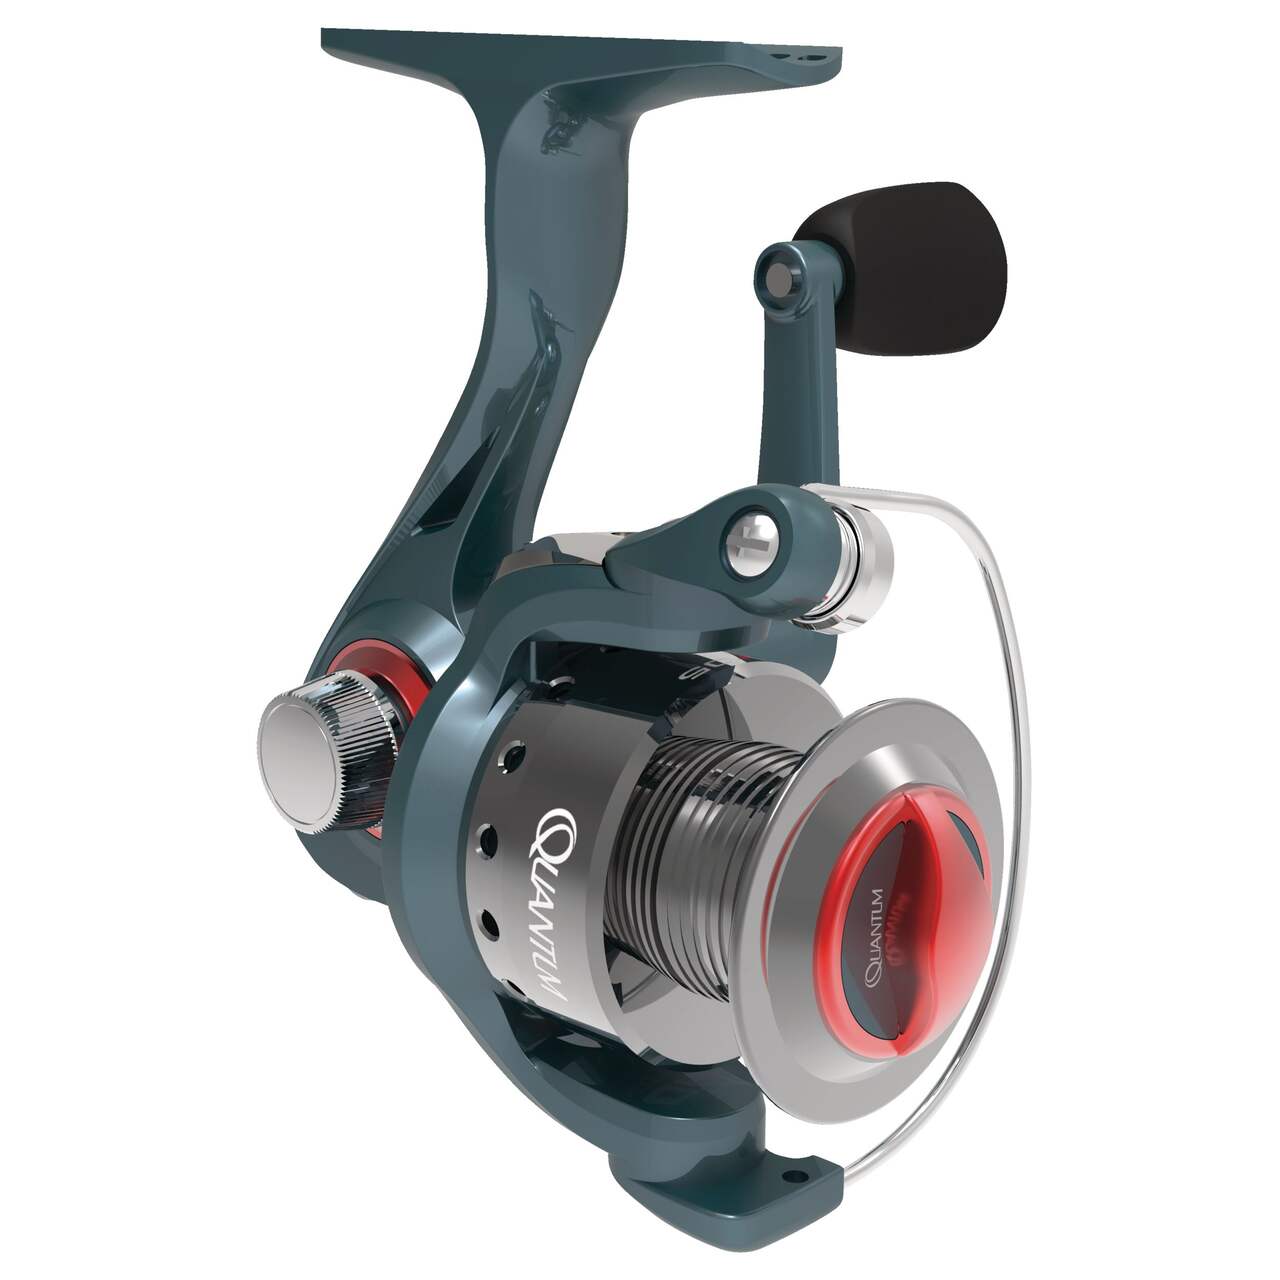  Quantum Drive Spinning Fishing Reel, Size 05 Reel, Changeable  Right- or Left-Hand Retrieve, Forged and Machined Double-Anodized Spool,  5.7:1 Gear Ratio, R.E.D Graphite Unibody Design, Silver/Black : Sports &  Outdoors